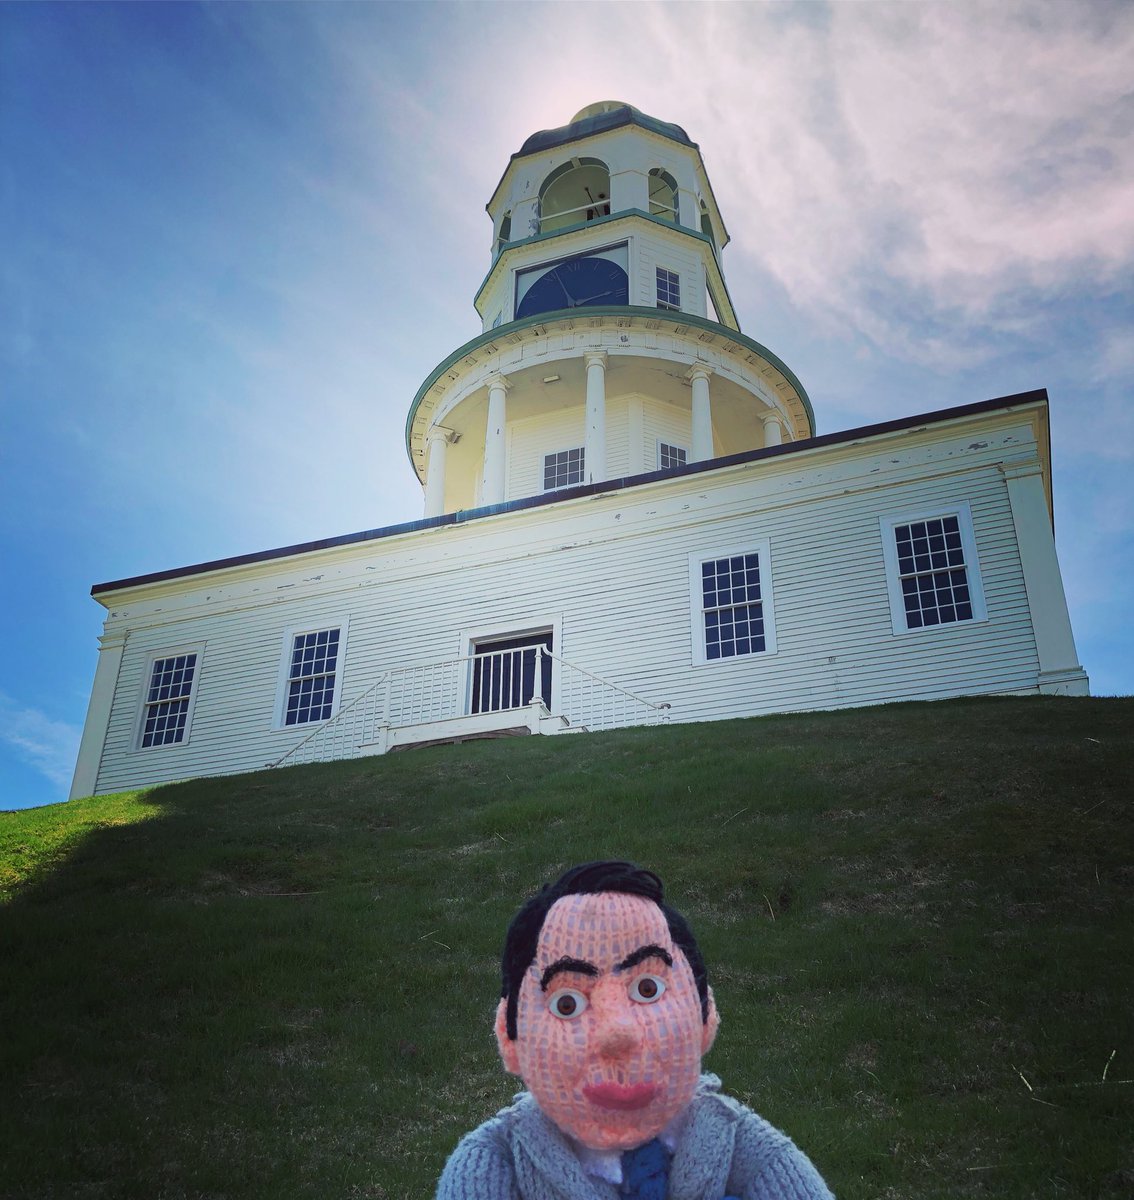 RT @jimmycarr: Hello Nova Scotia! I’m performing at the Rebecca Cohn Auditorium in Halifax this evening. https://t.co/JH1cOafLb7